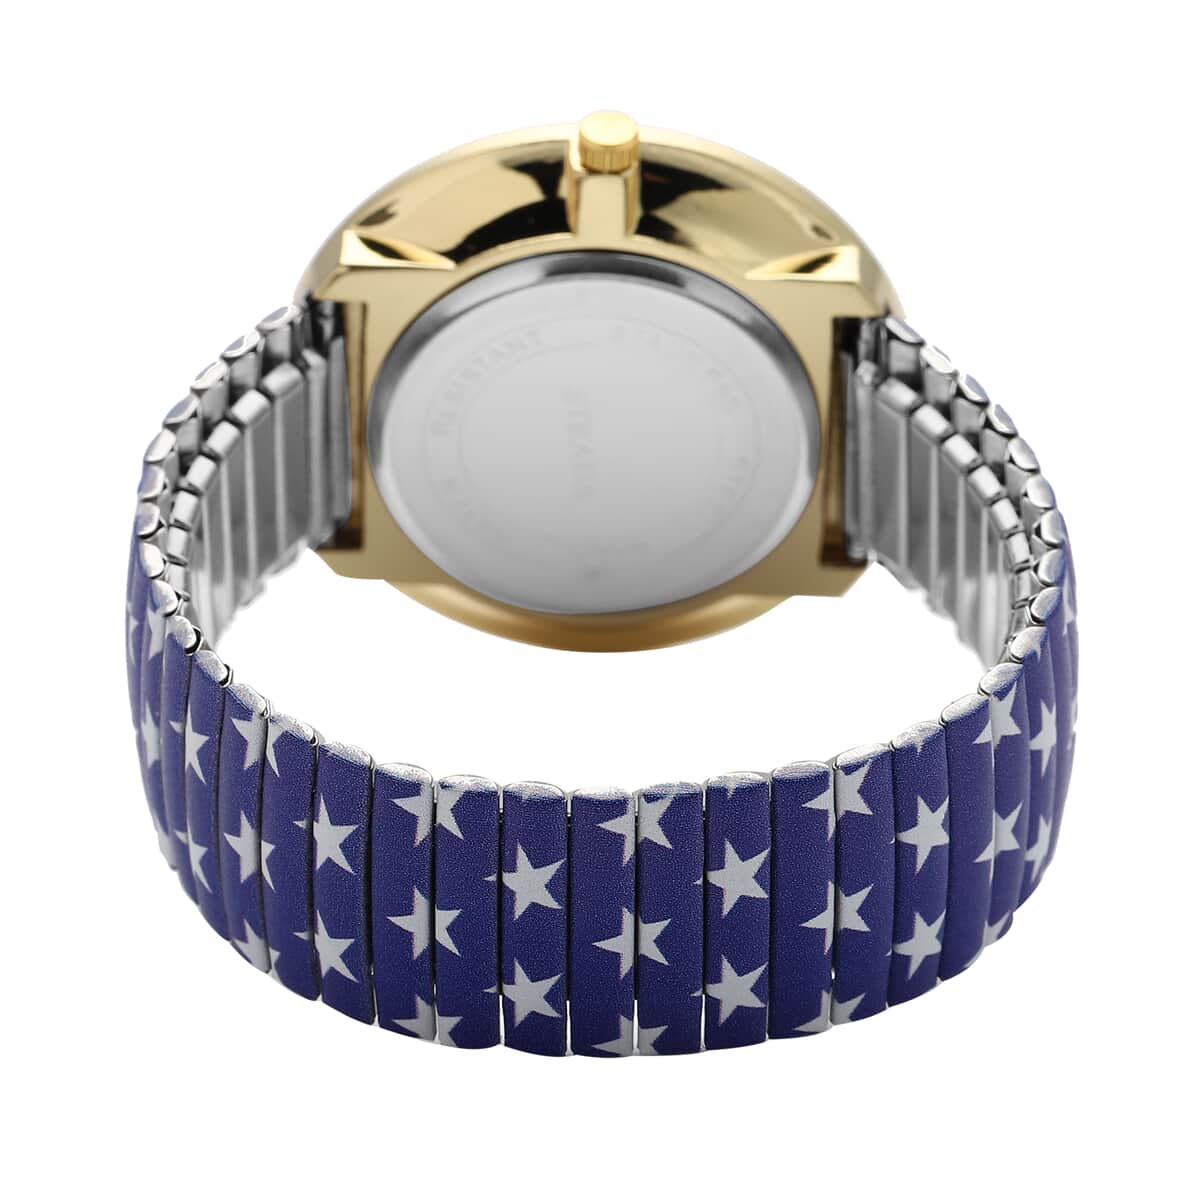 Strada Austrian Crystal Japanese Movement Blue Stars Pattern Stretch Bracelet Watch with Stainless Steel Strap image number 5